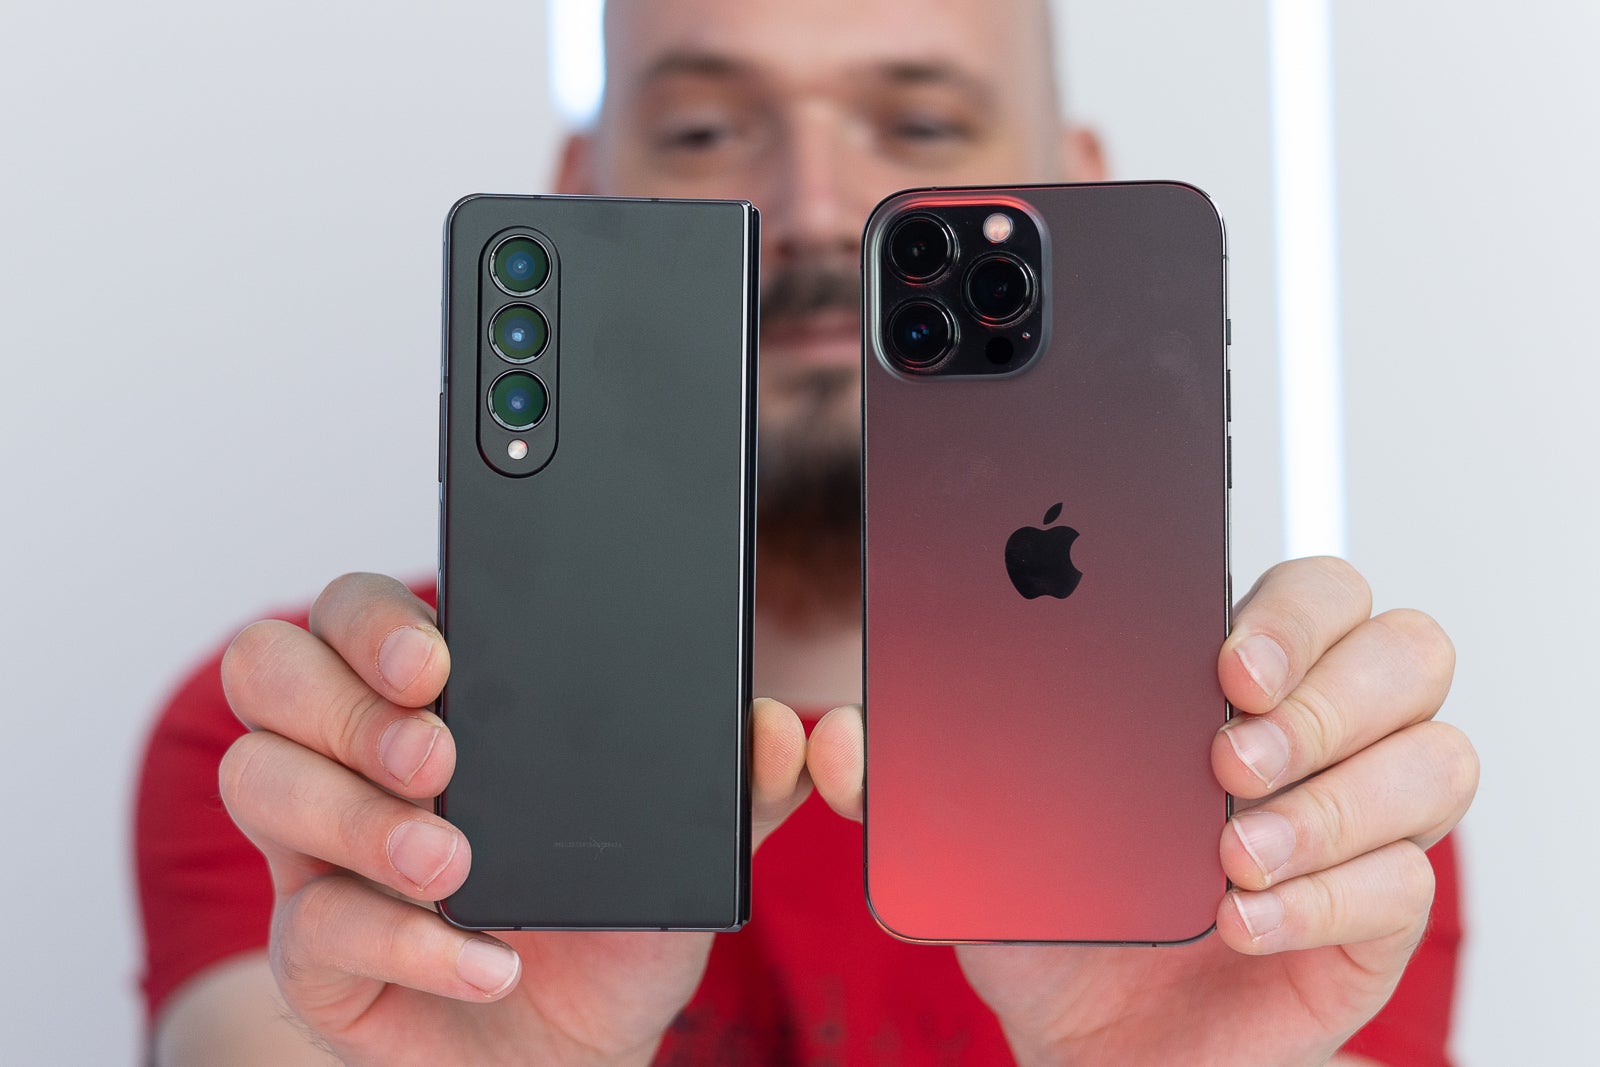 (Image Credit - PhoneArena) Triple camera vs Triple camera - Samsung Galaxy Z Fold 4 vs iPhone 13 Pro Max: the most expensive champions from each side